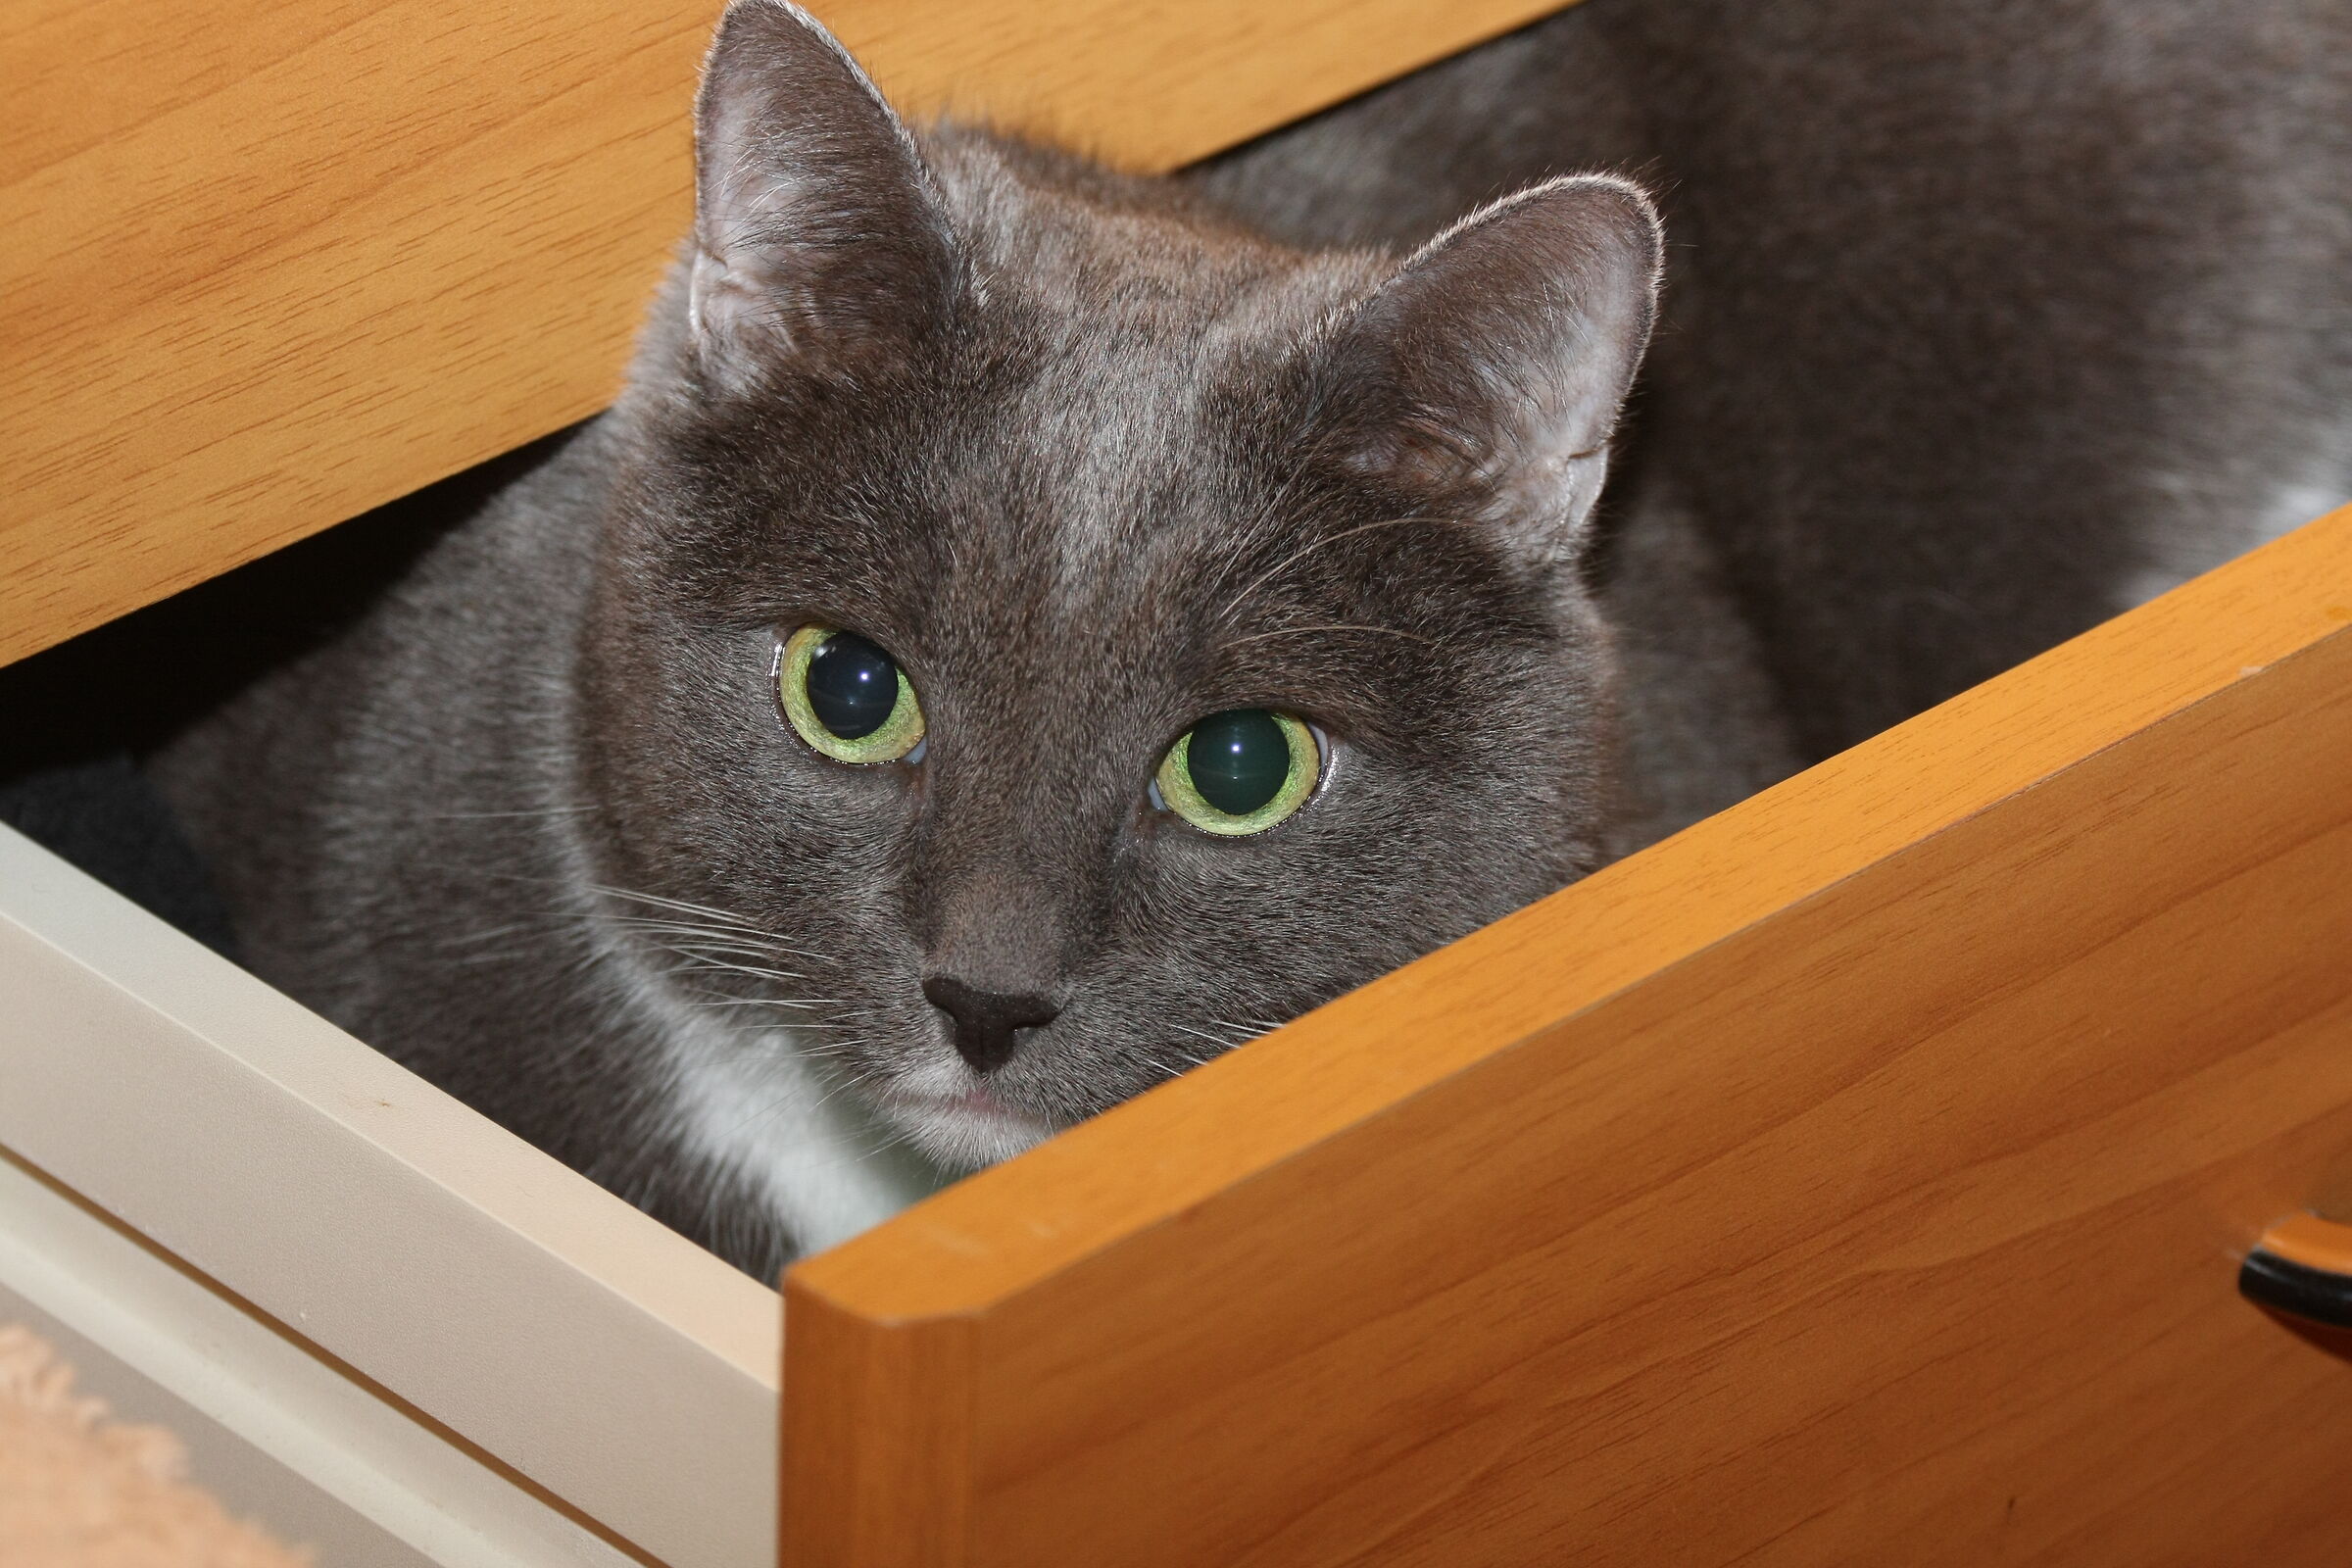 In the drawer...